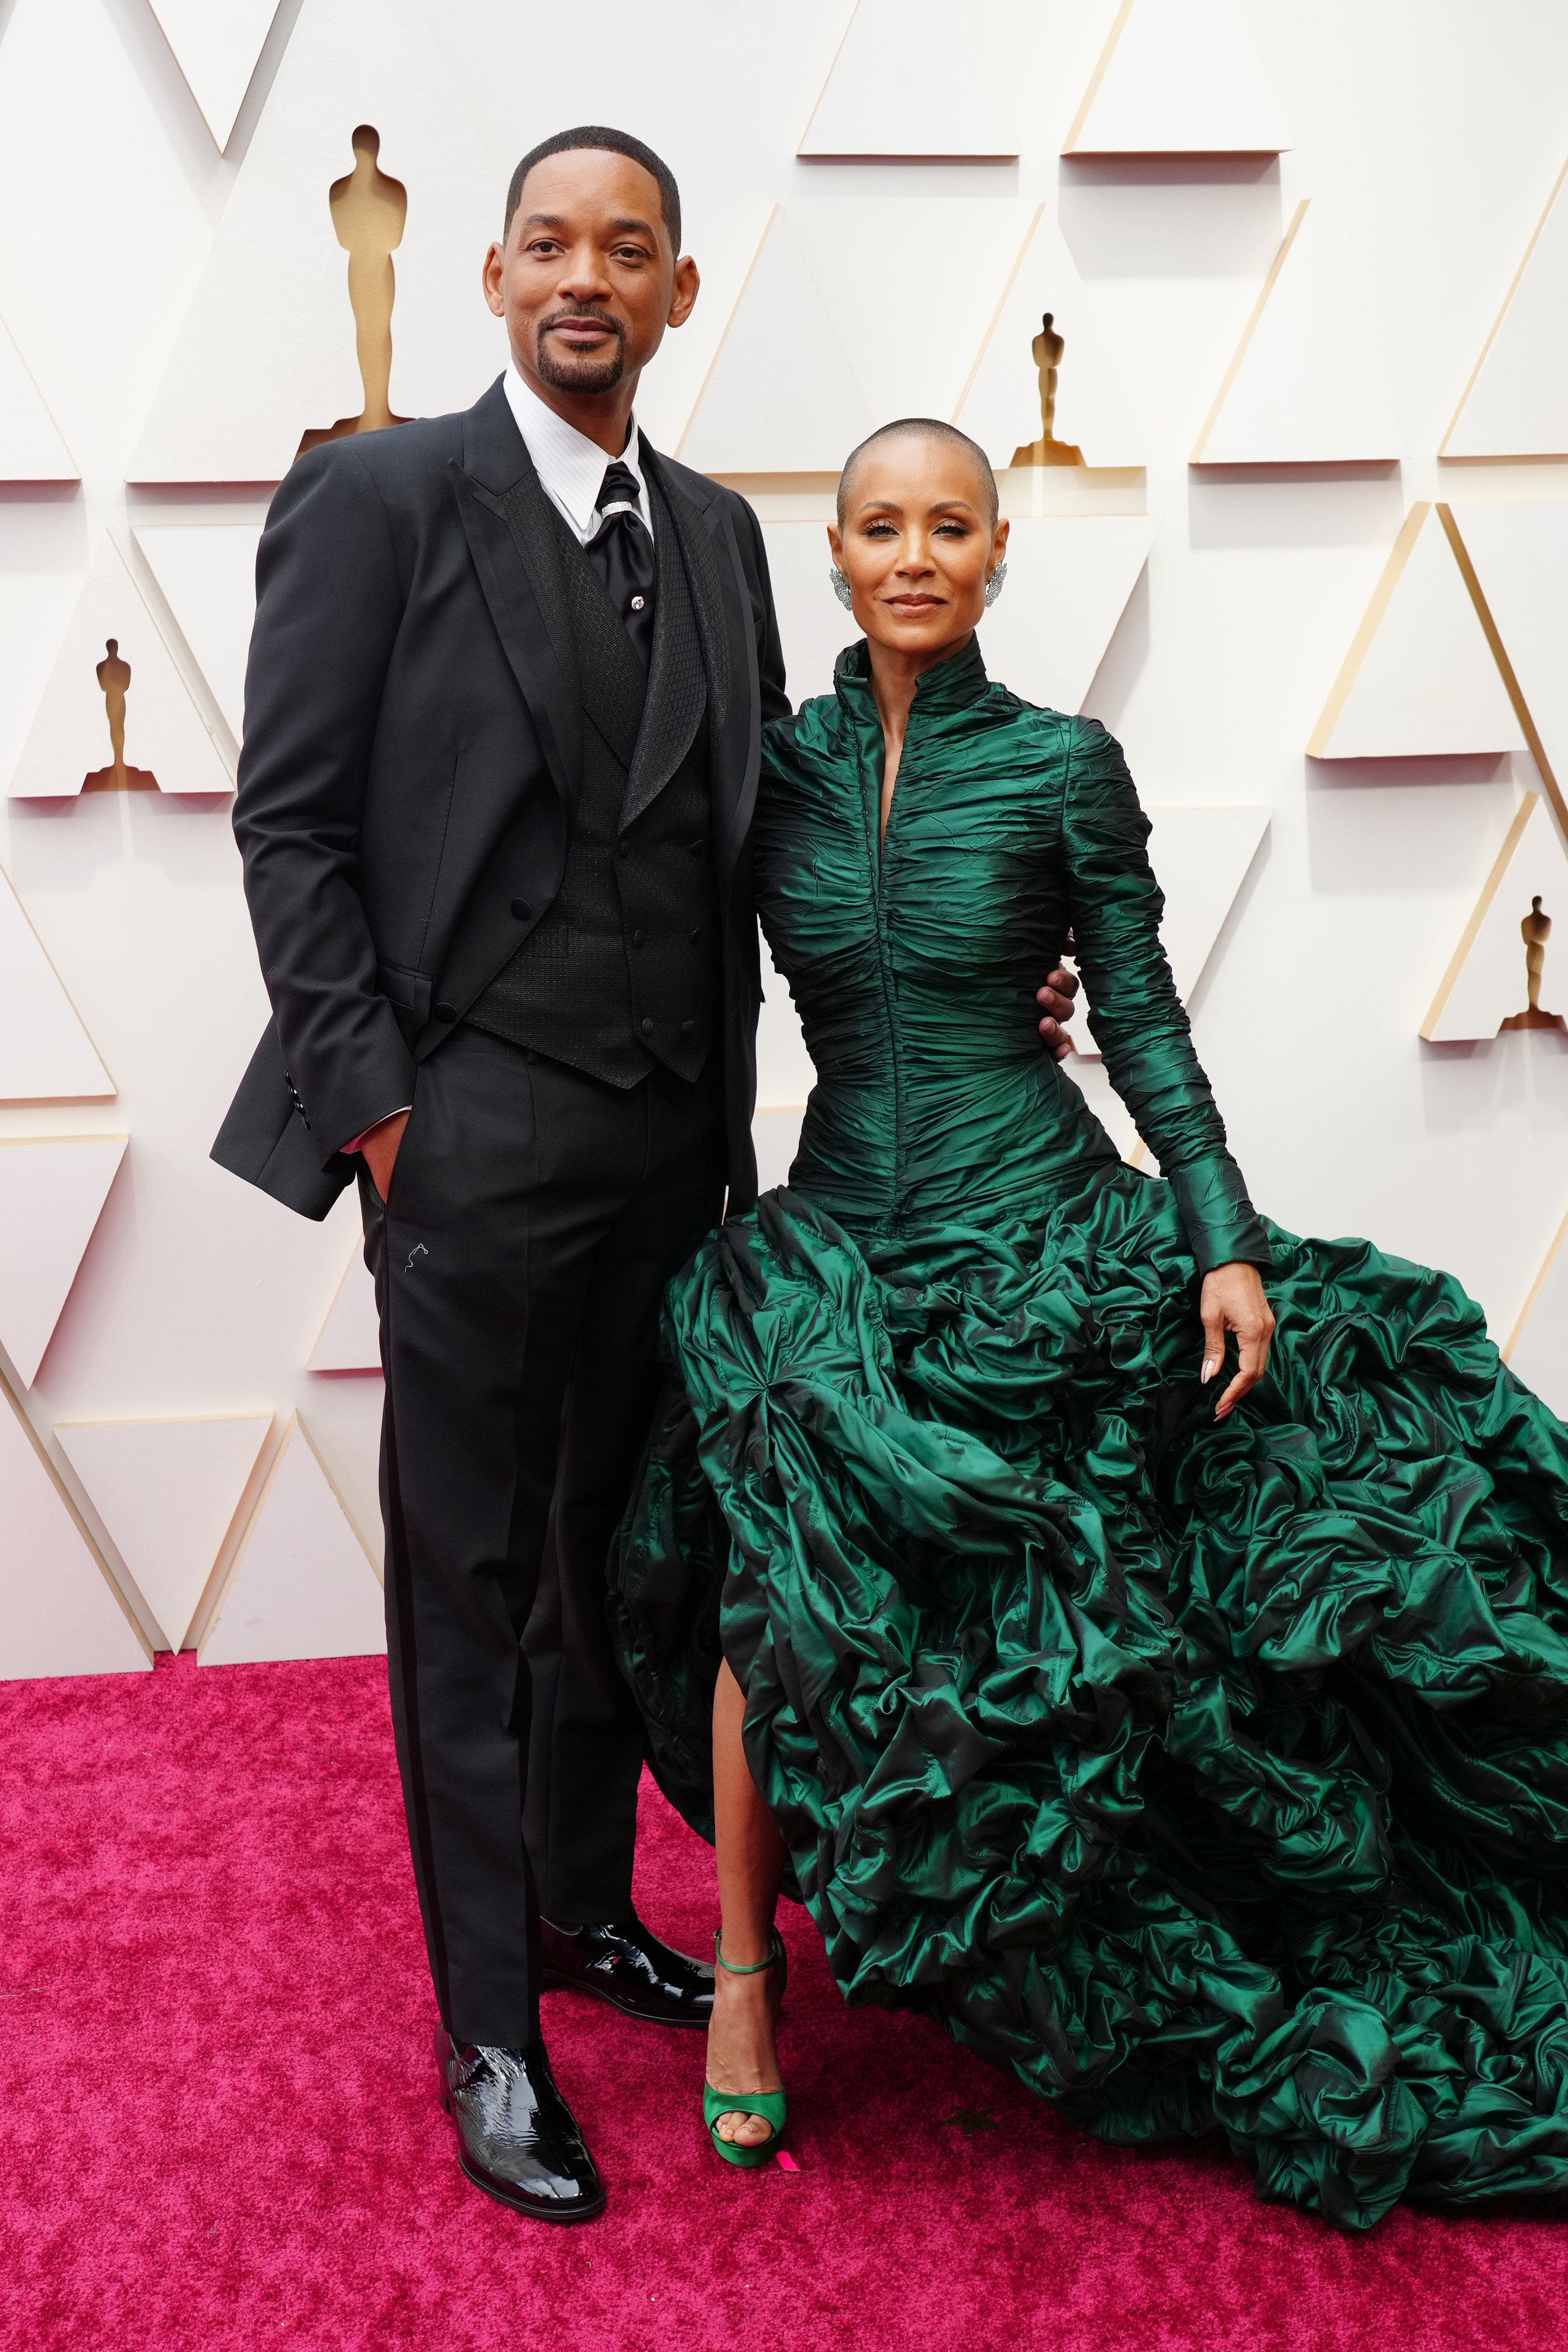 Jada Pinkett Smith and Will Smith Have Been Secretly Separated